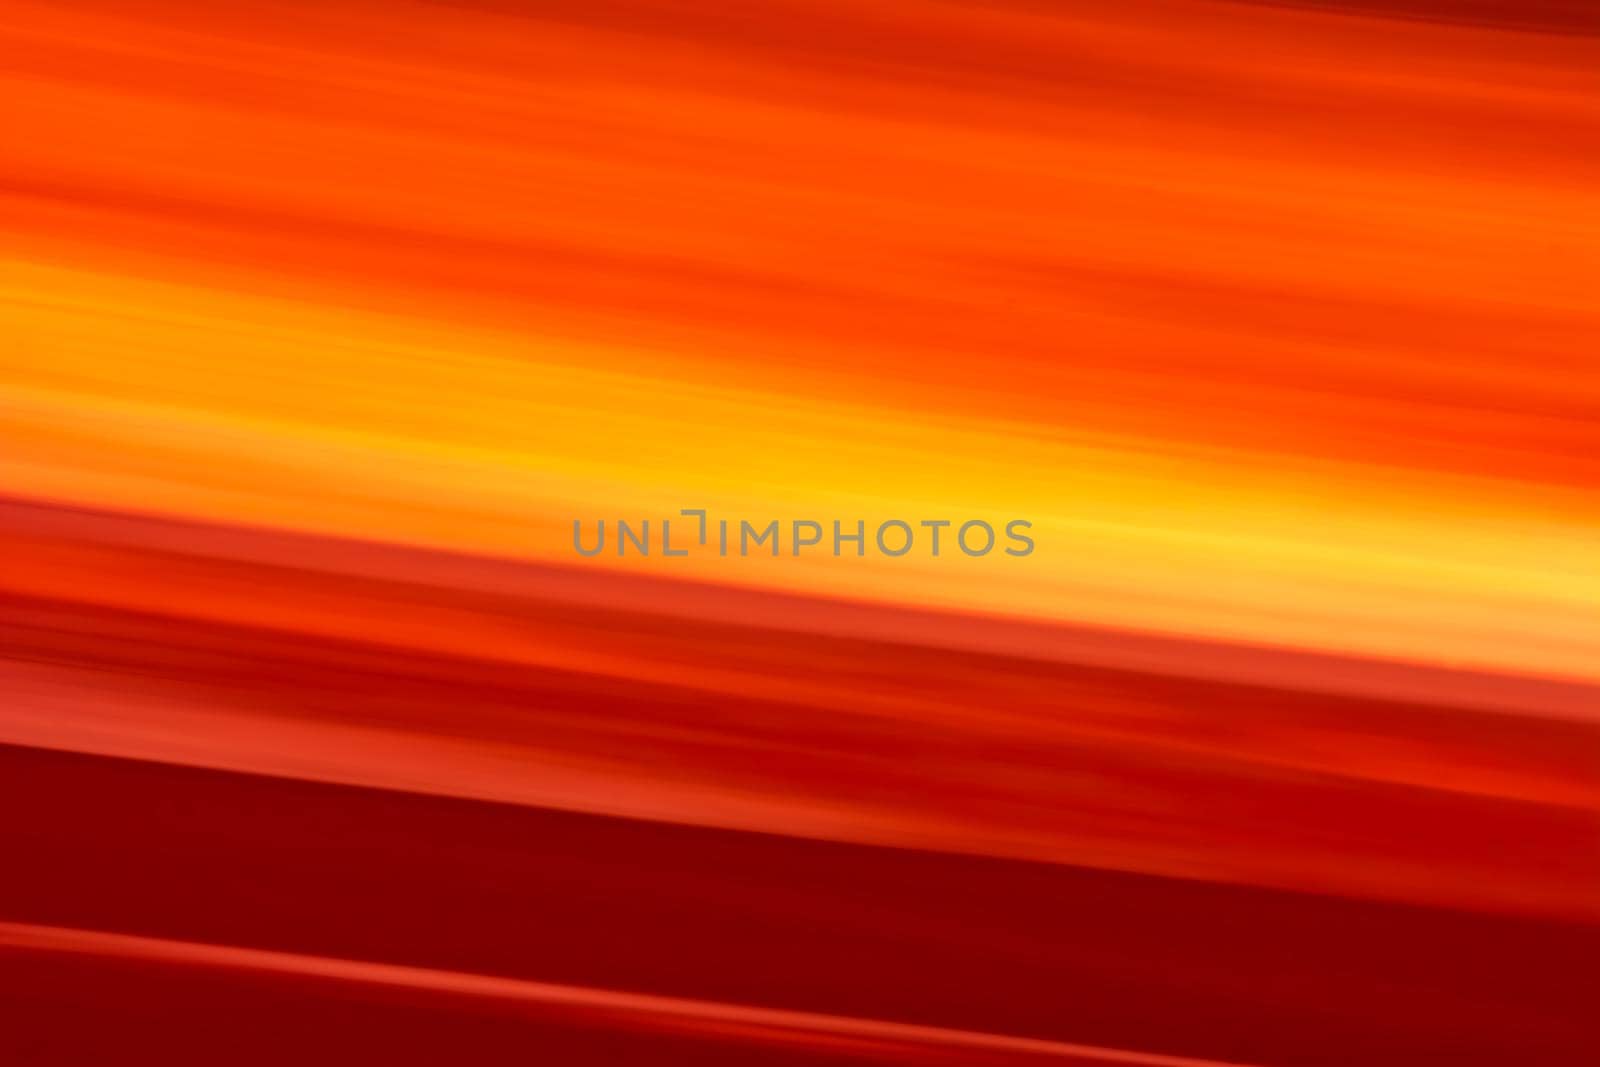 Bright orange red burgundy background. Abstract illustration with gradient, lines, waves and highlights. Backdrop